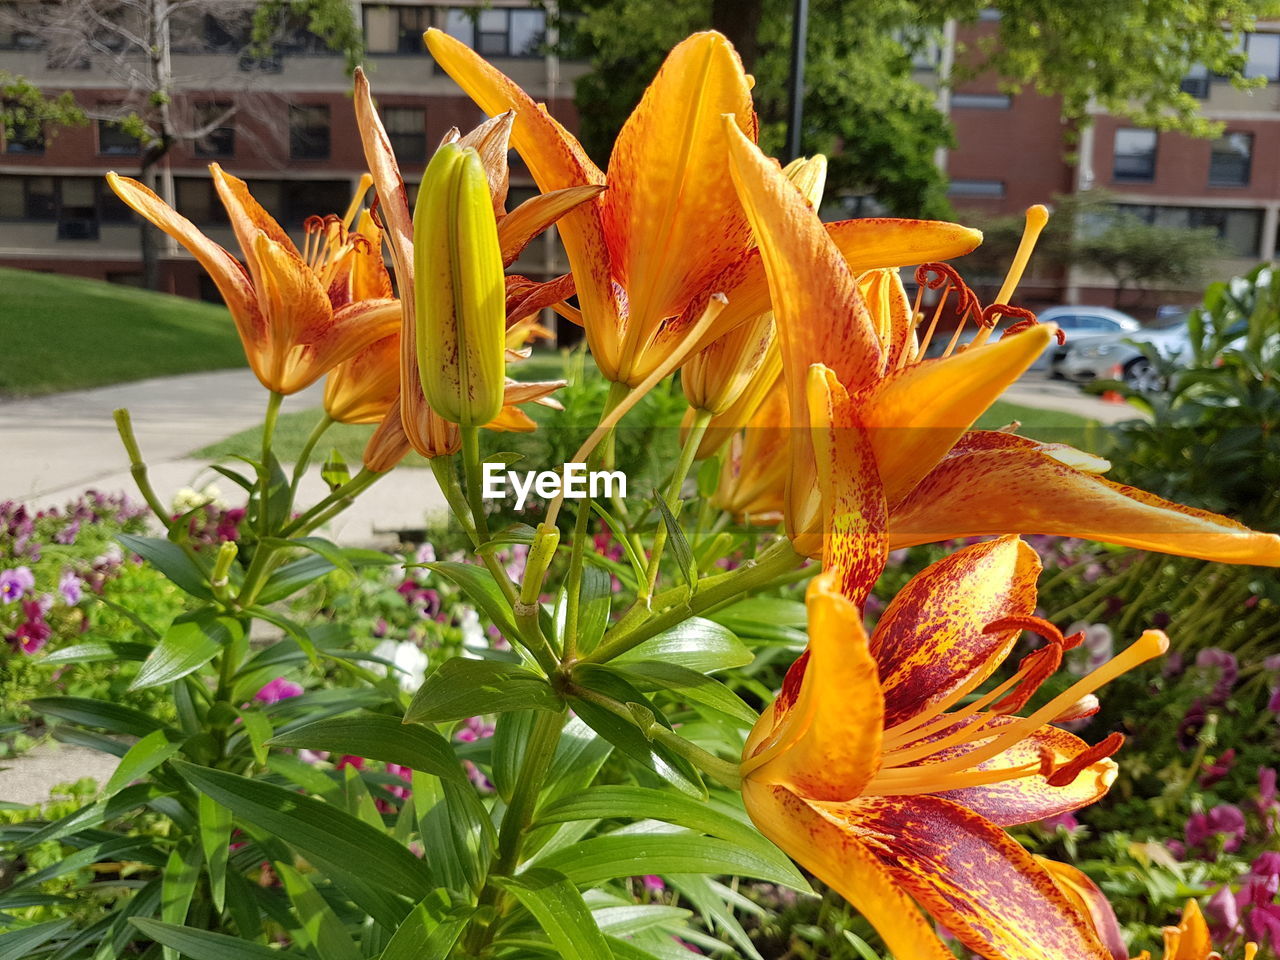 CLOSE-UP OF FRESH ORANGE DAY LILY BLOOMING OUTDOORS